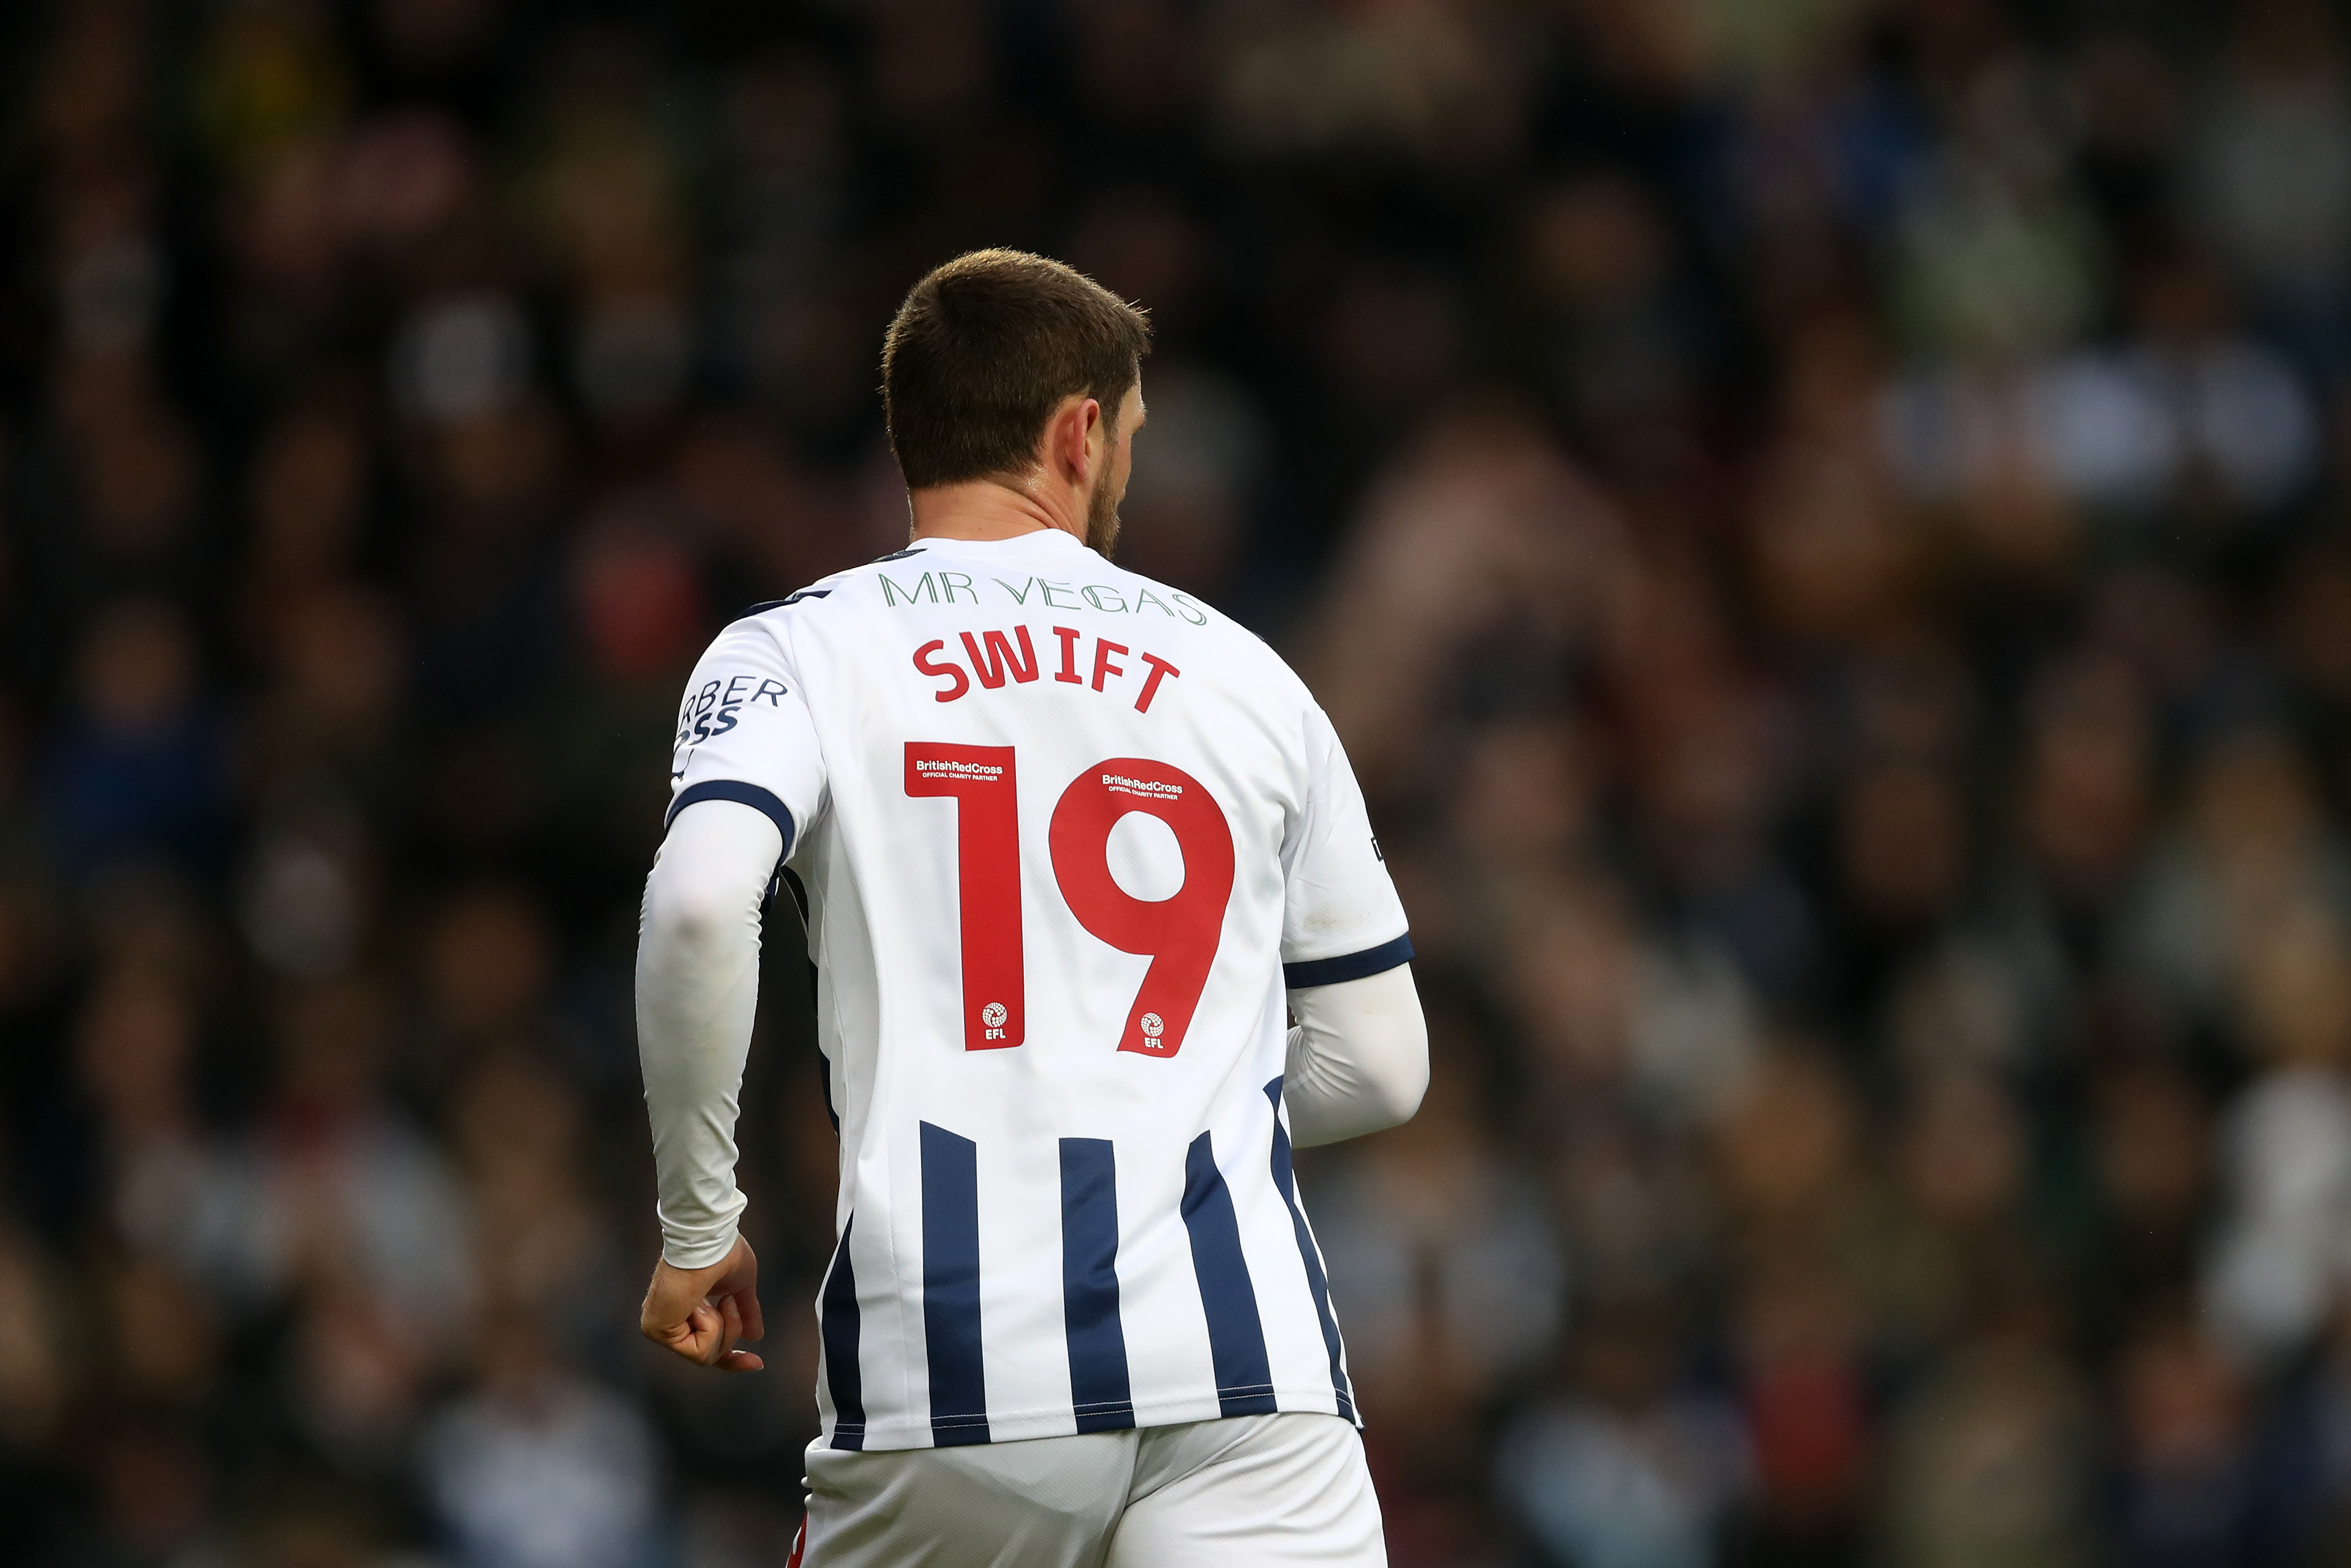 The back of John Swift during a game at The Hawthorns with his name and number 19 showing